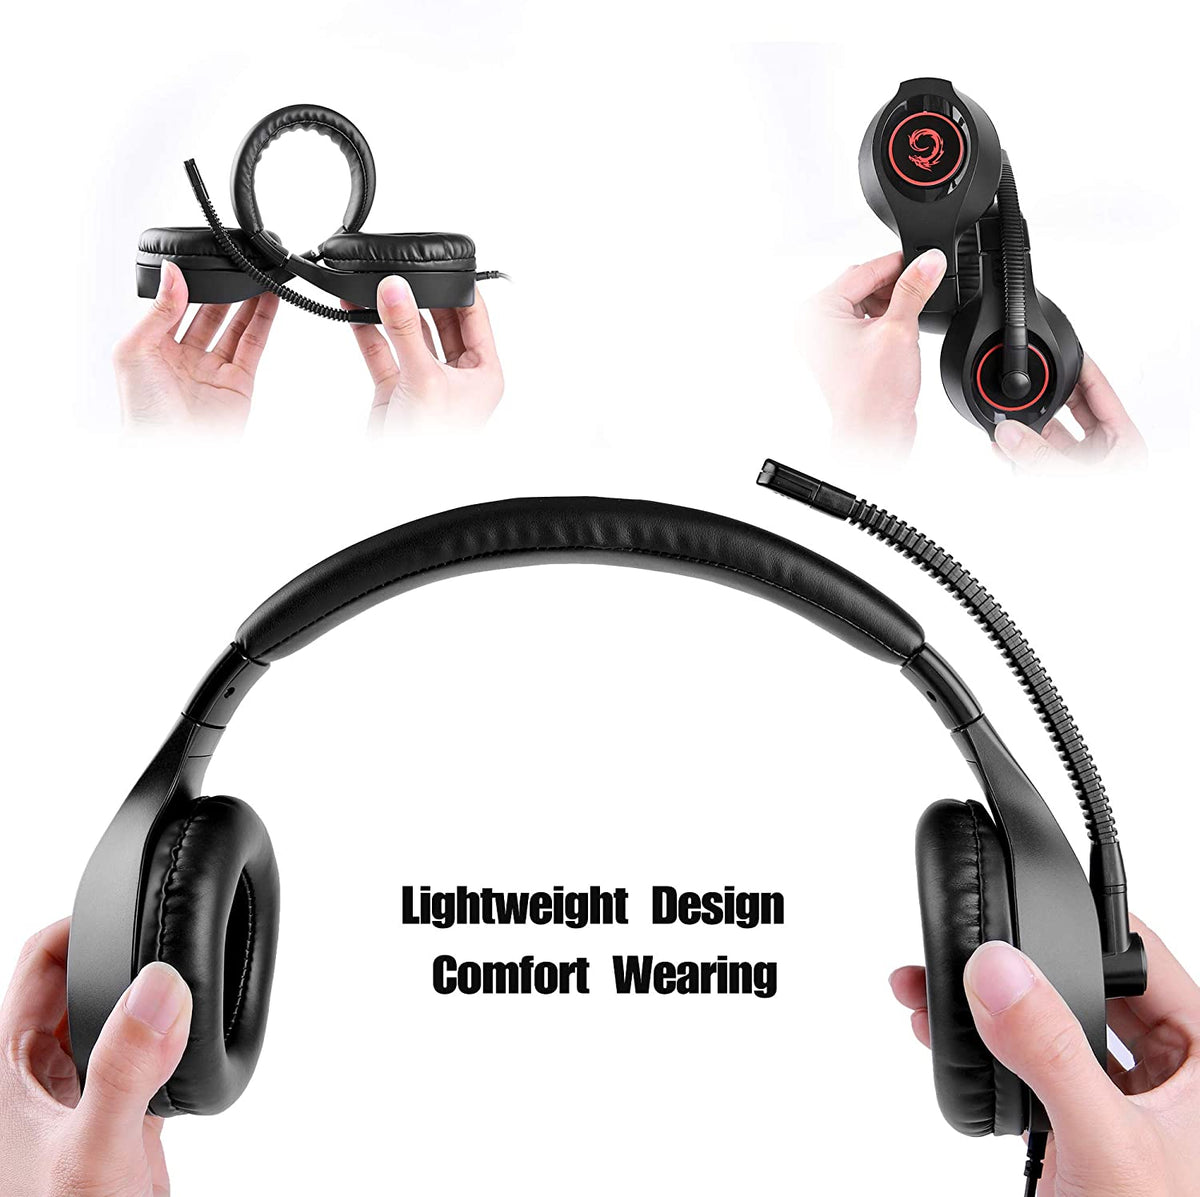 A2 Senicc 2 Pack Gaming Electronics with Headset Computers & AMT | Z0024IK7R3 – Microphone